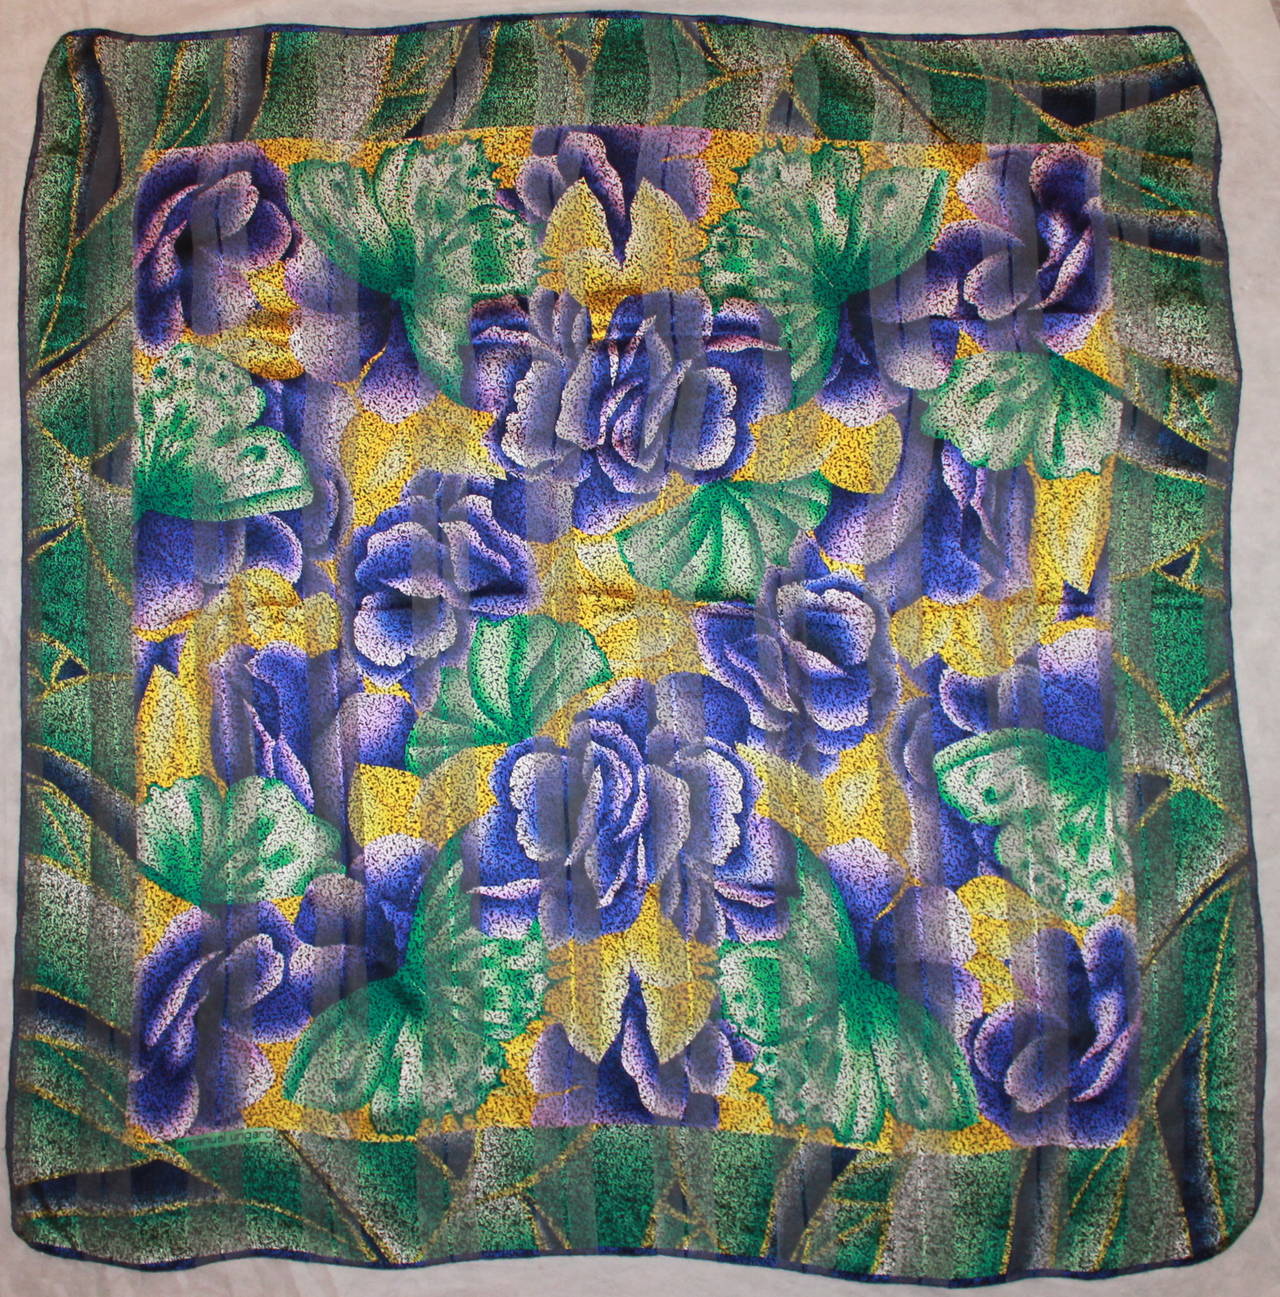 Emanuel Ungaro Green, Purple & Yellow Floral Silk Shawl. This shawl is in excellent condition and has purple flowers with green petals and a yellow background. 

Length- 53.75